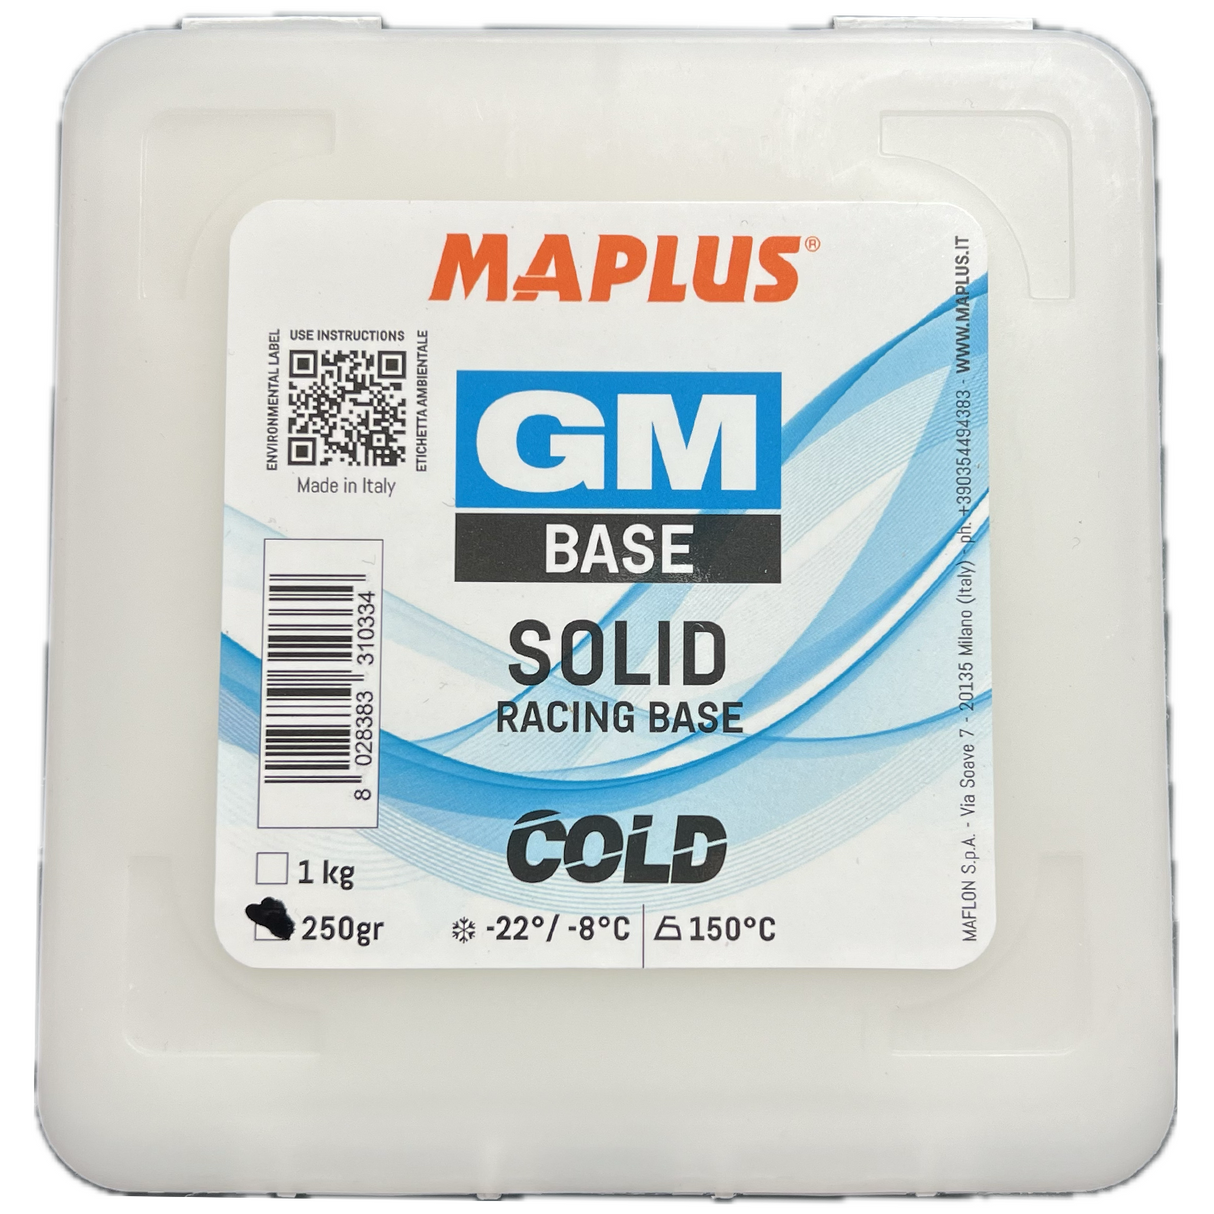 Maplus GM Base Solid Cold paraffin 250gr